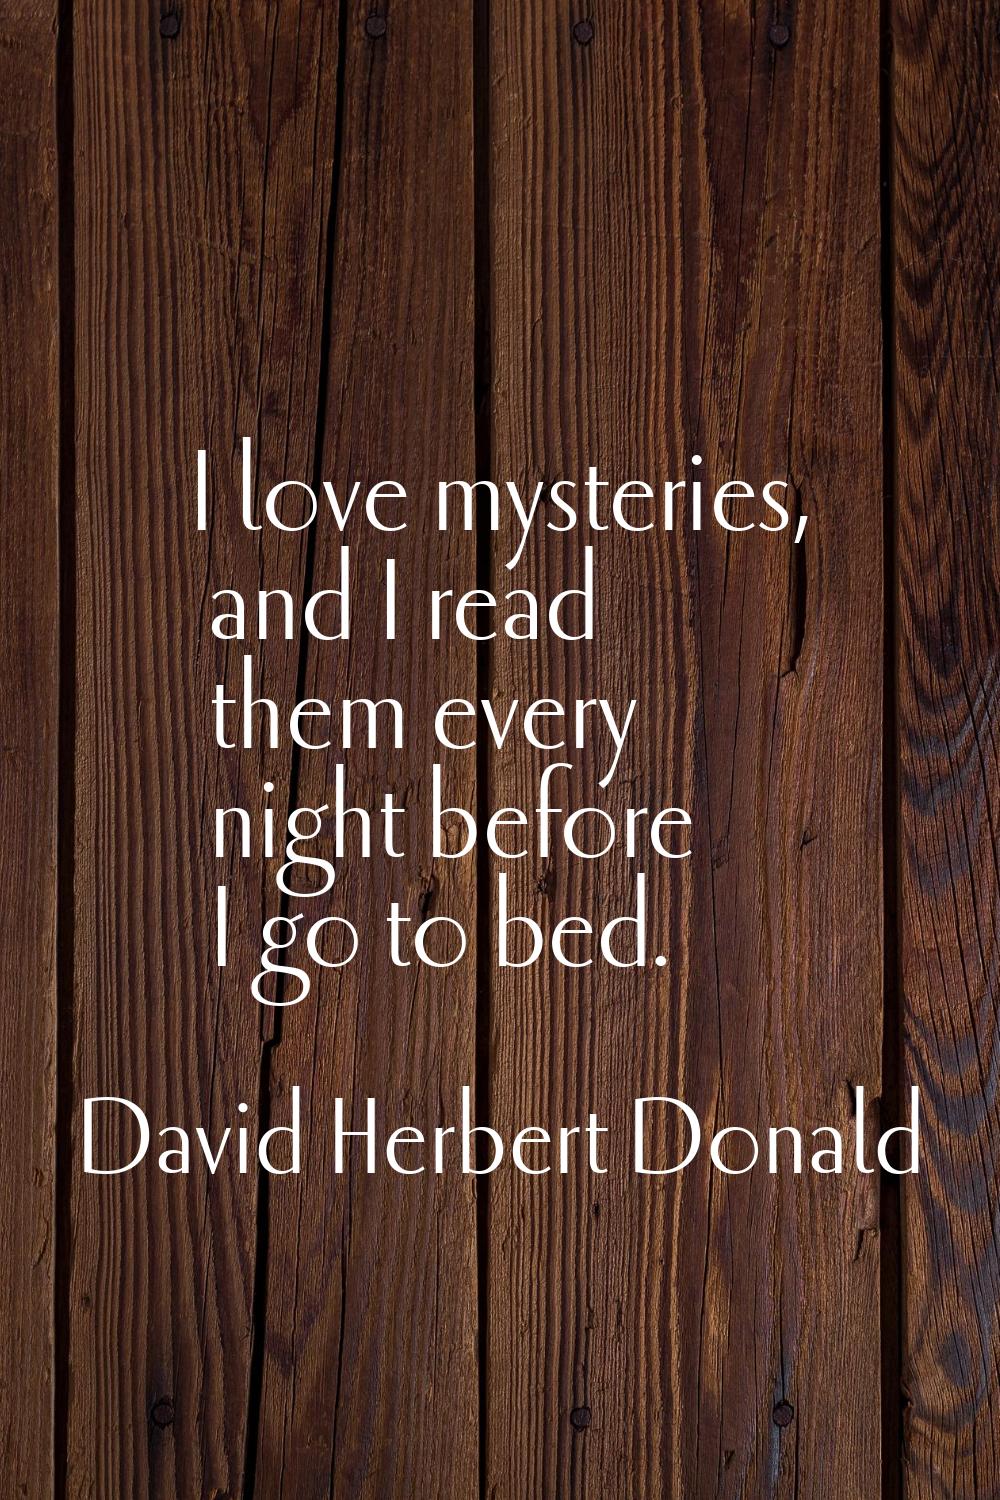 I love mysteries, and I read them every night before I go to bed.